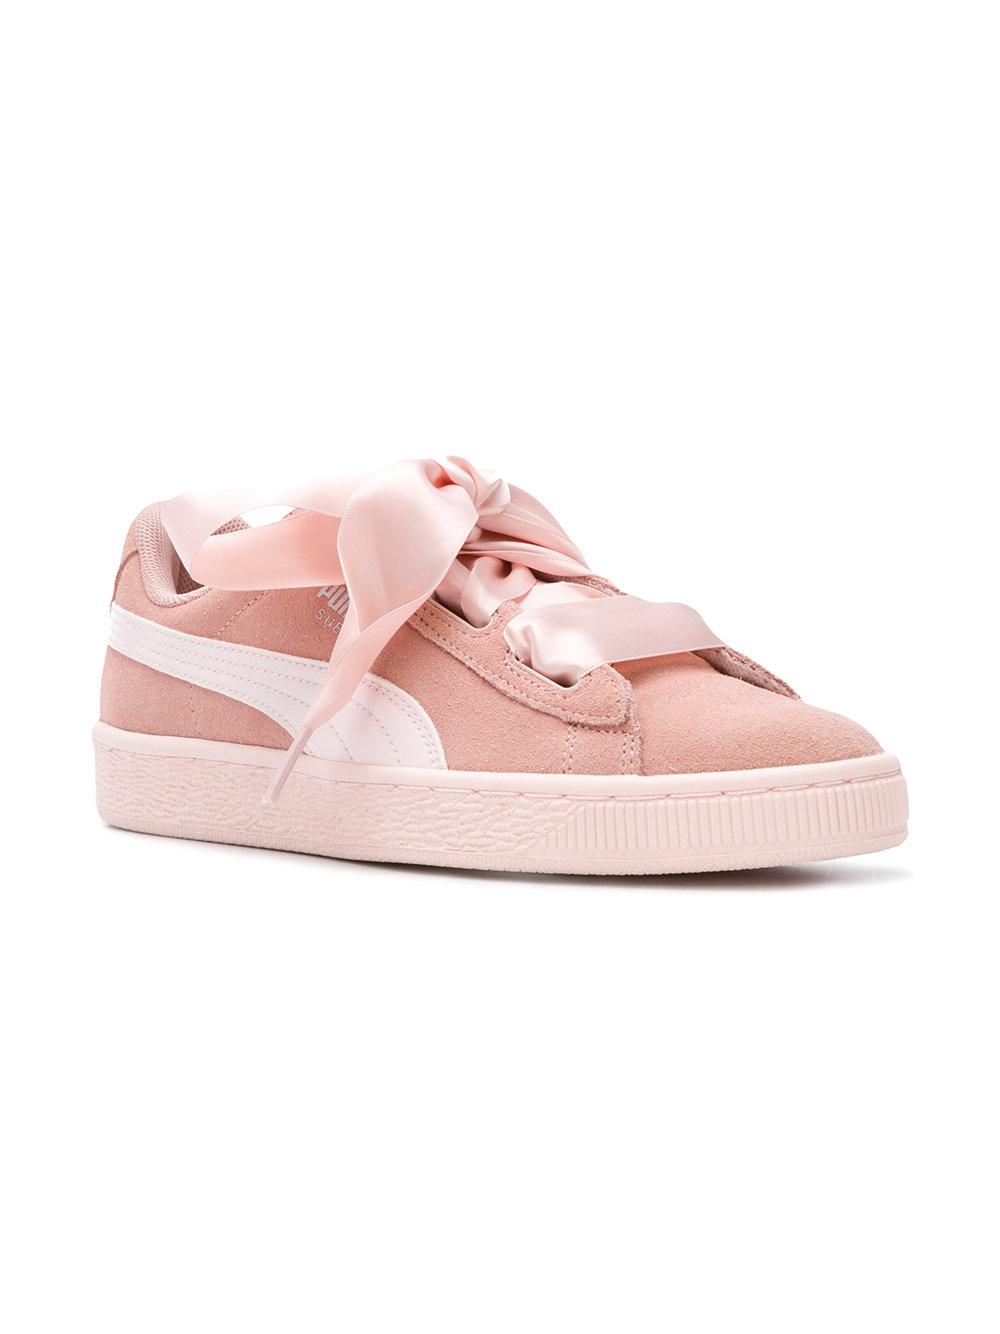 PUMA Ribbon Lace-up Sneakers in Pink | Lyst UK